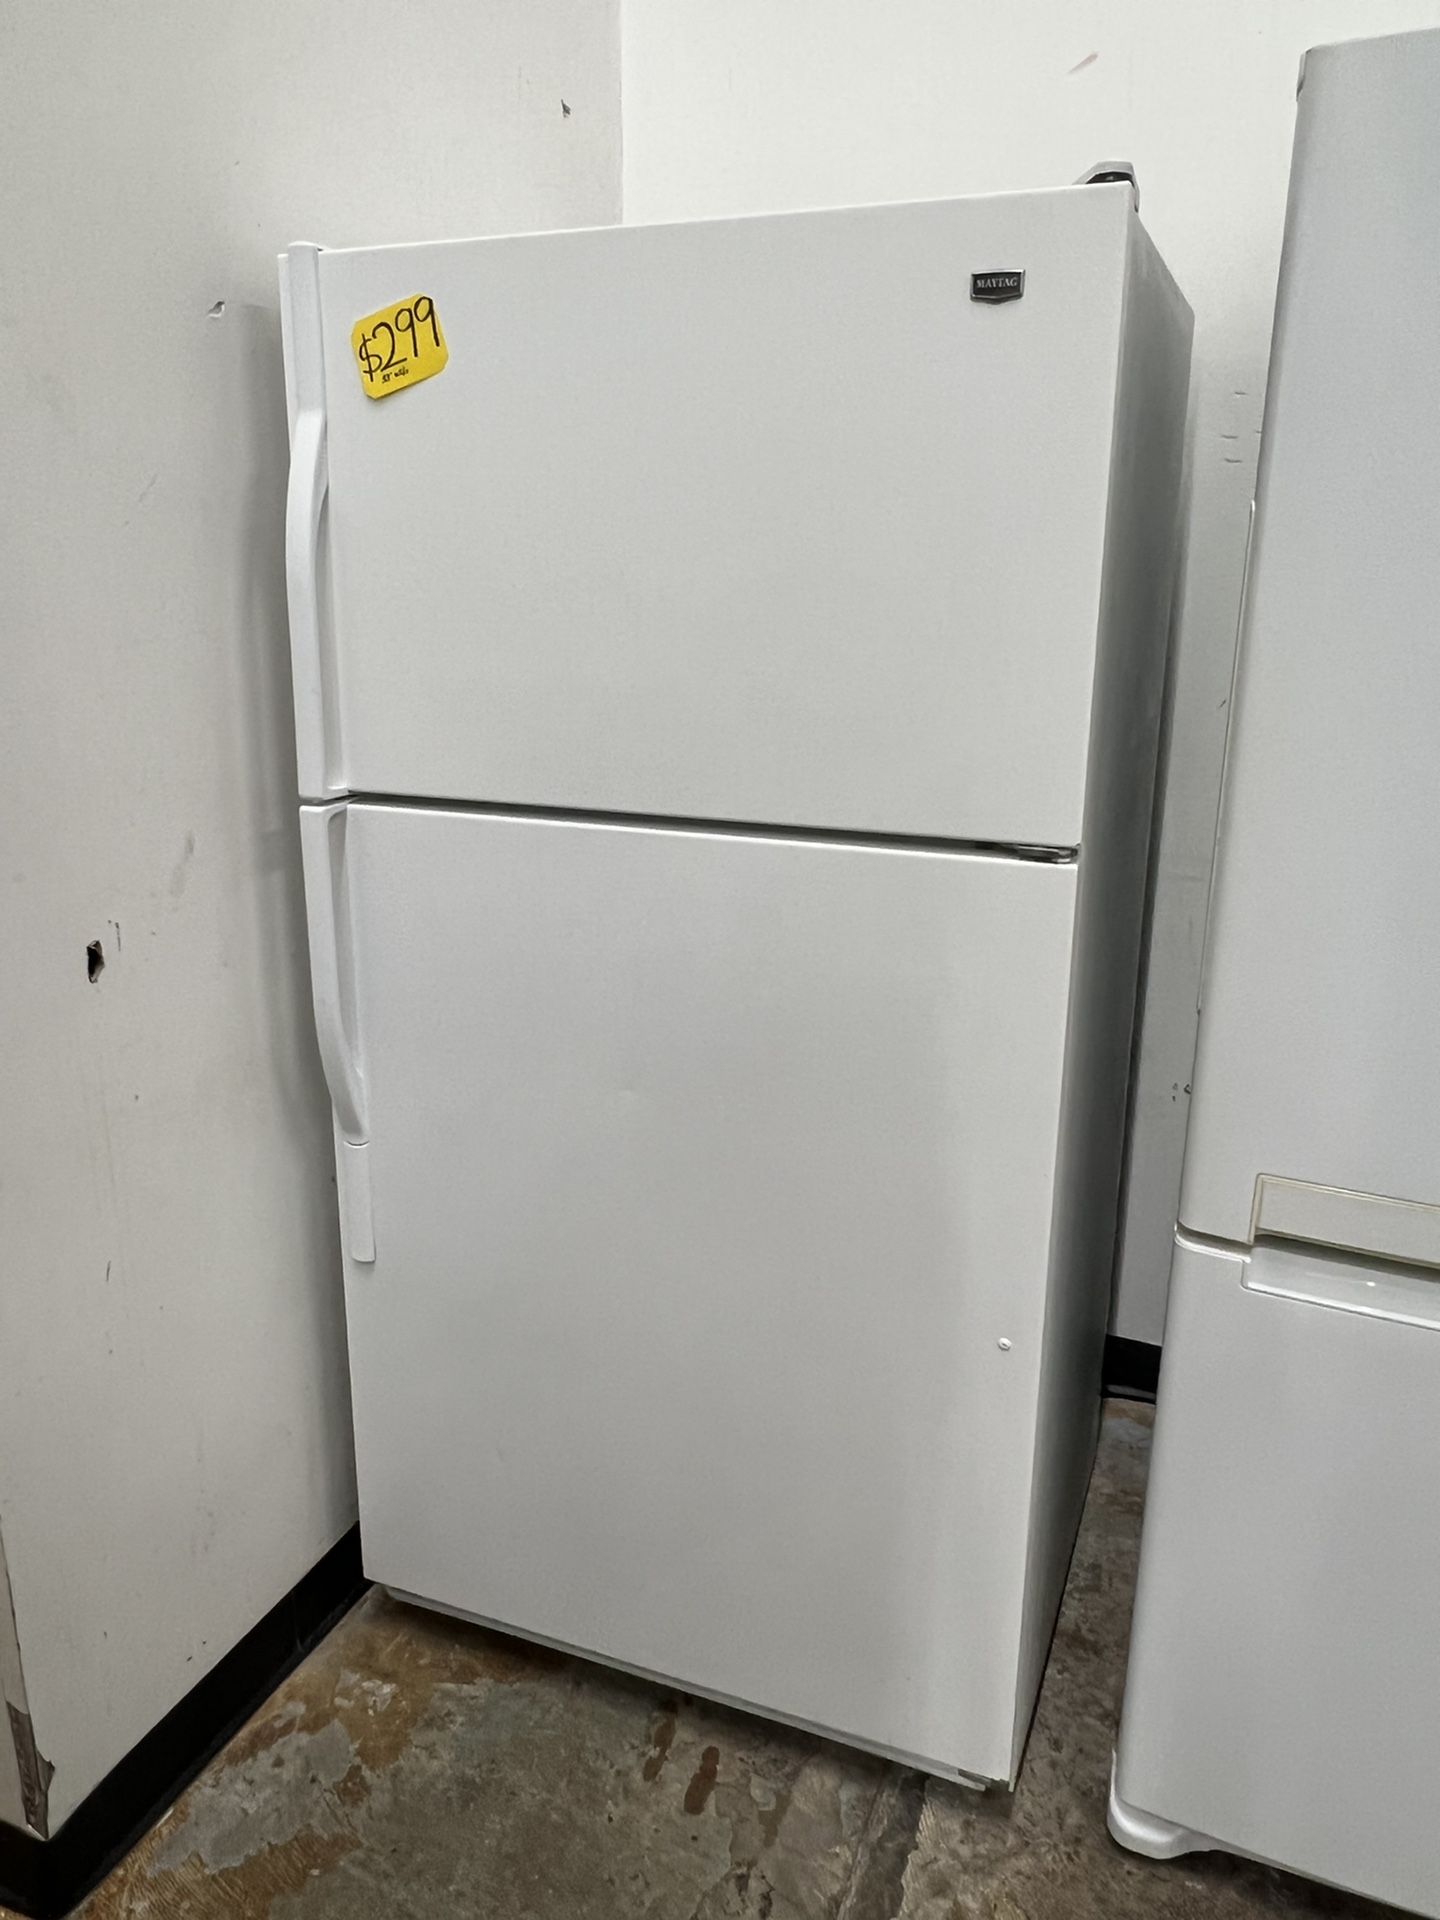 Maytag 33”wide Top Freezer Refrigerator In Great Condition 